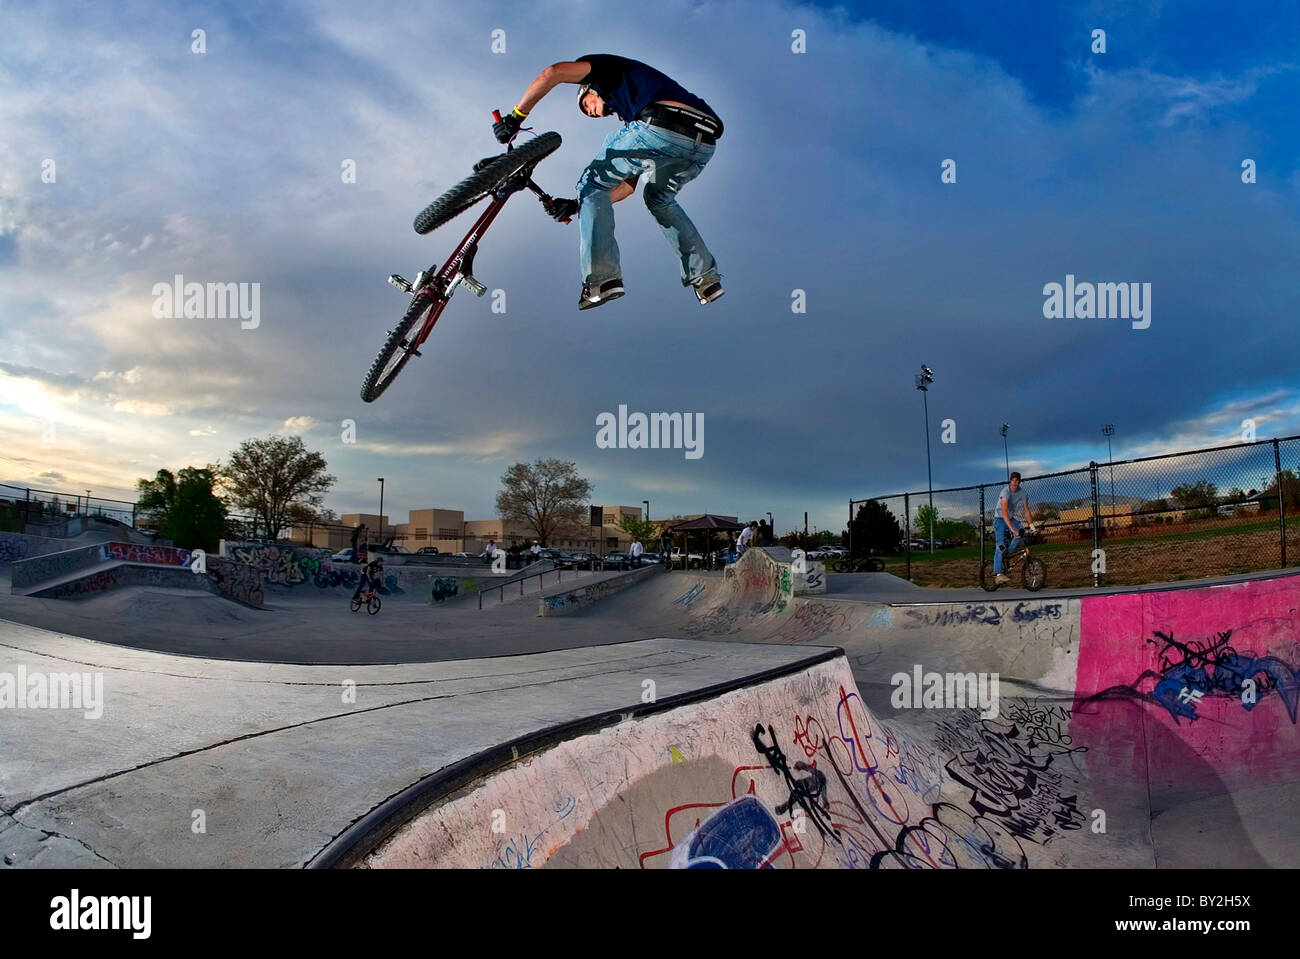 Tailwhip High Resolution Stock Photography and Images - Alamy